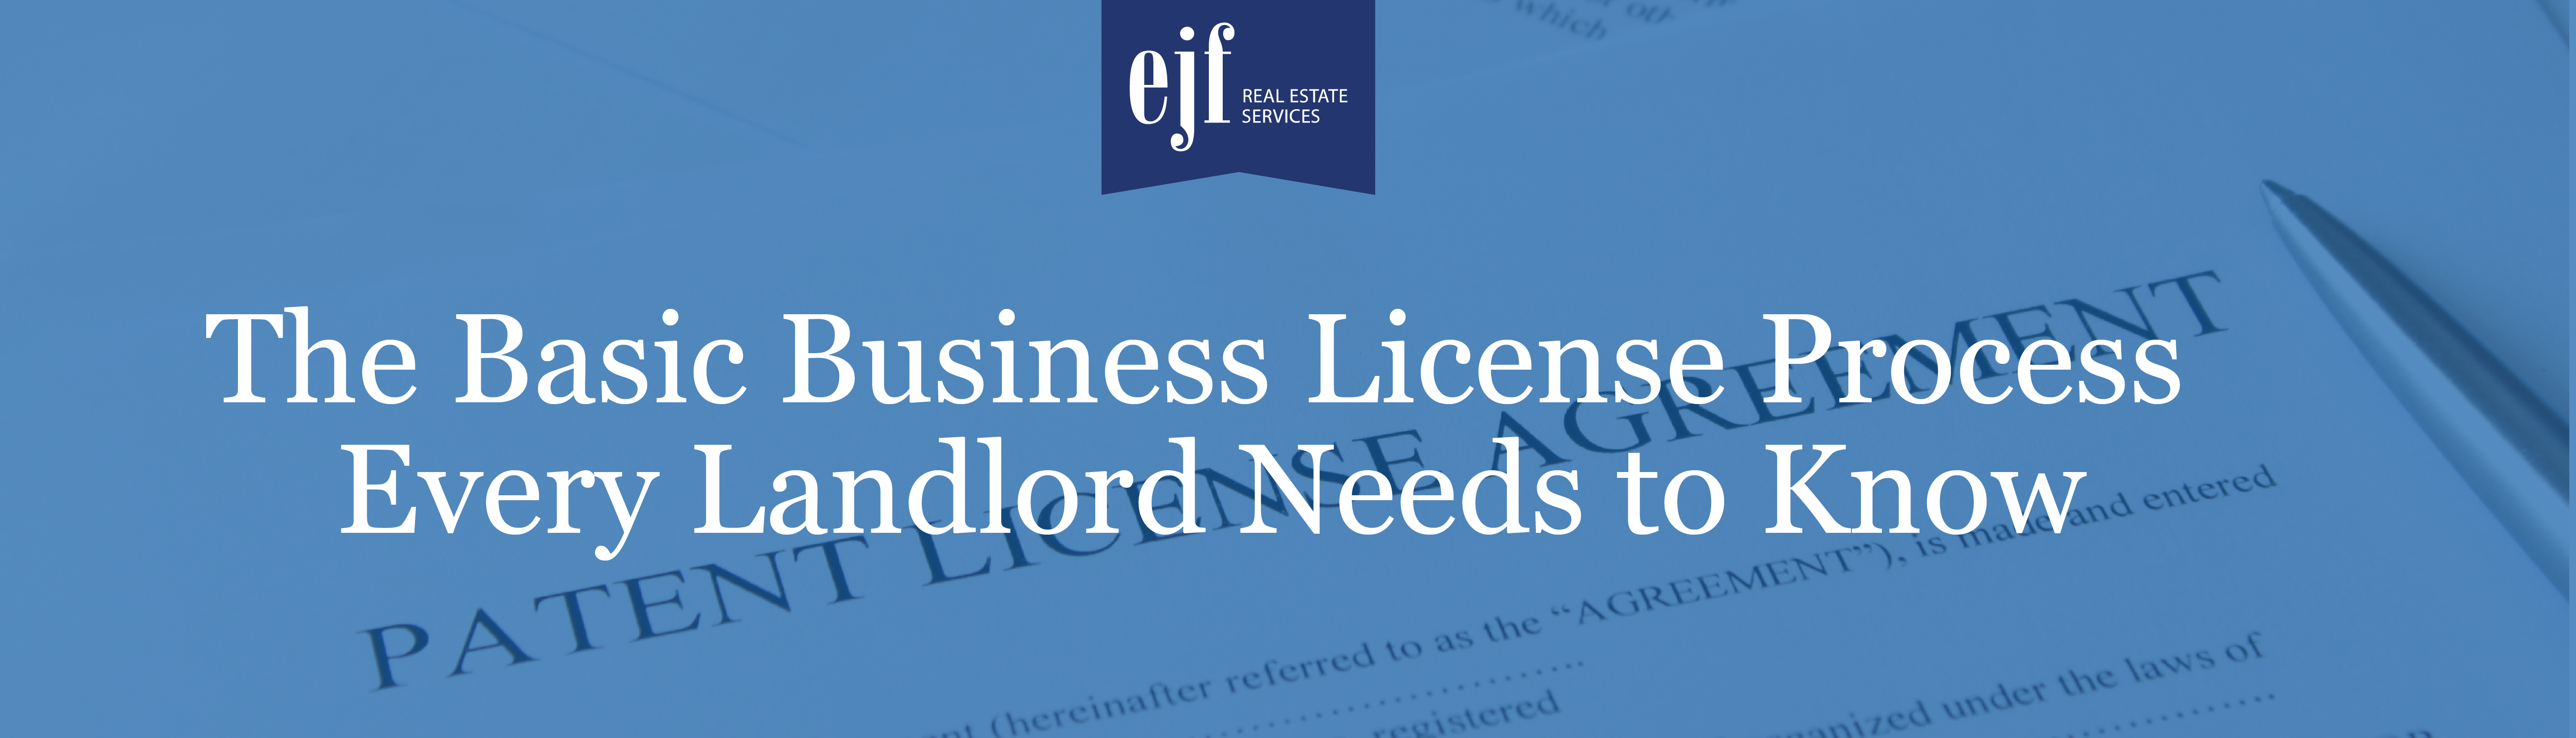 The Basic Business License Process, Every Landlord Needs to Know